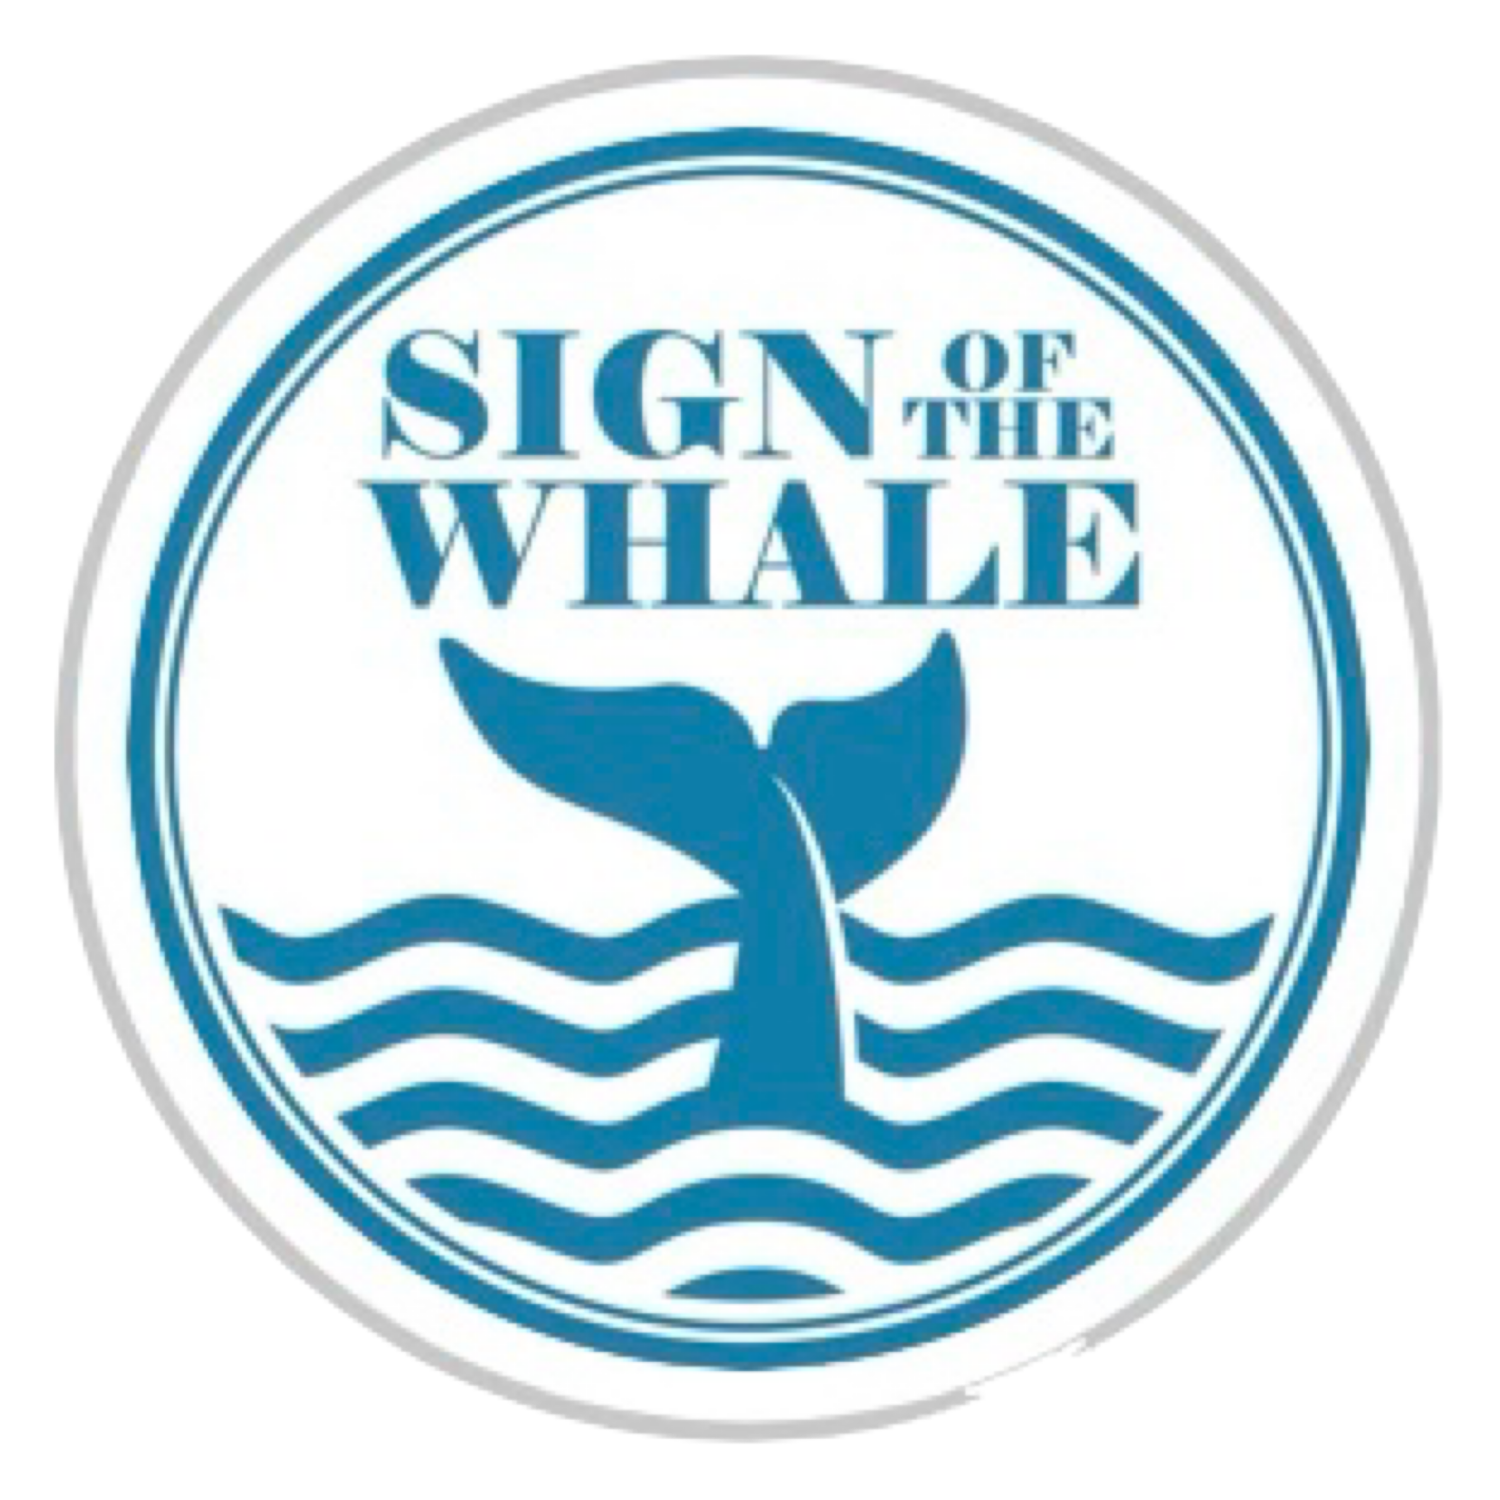 Sign of the Whale - Dupont Circle